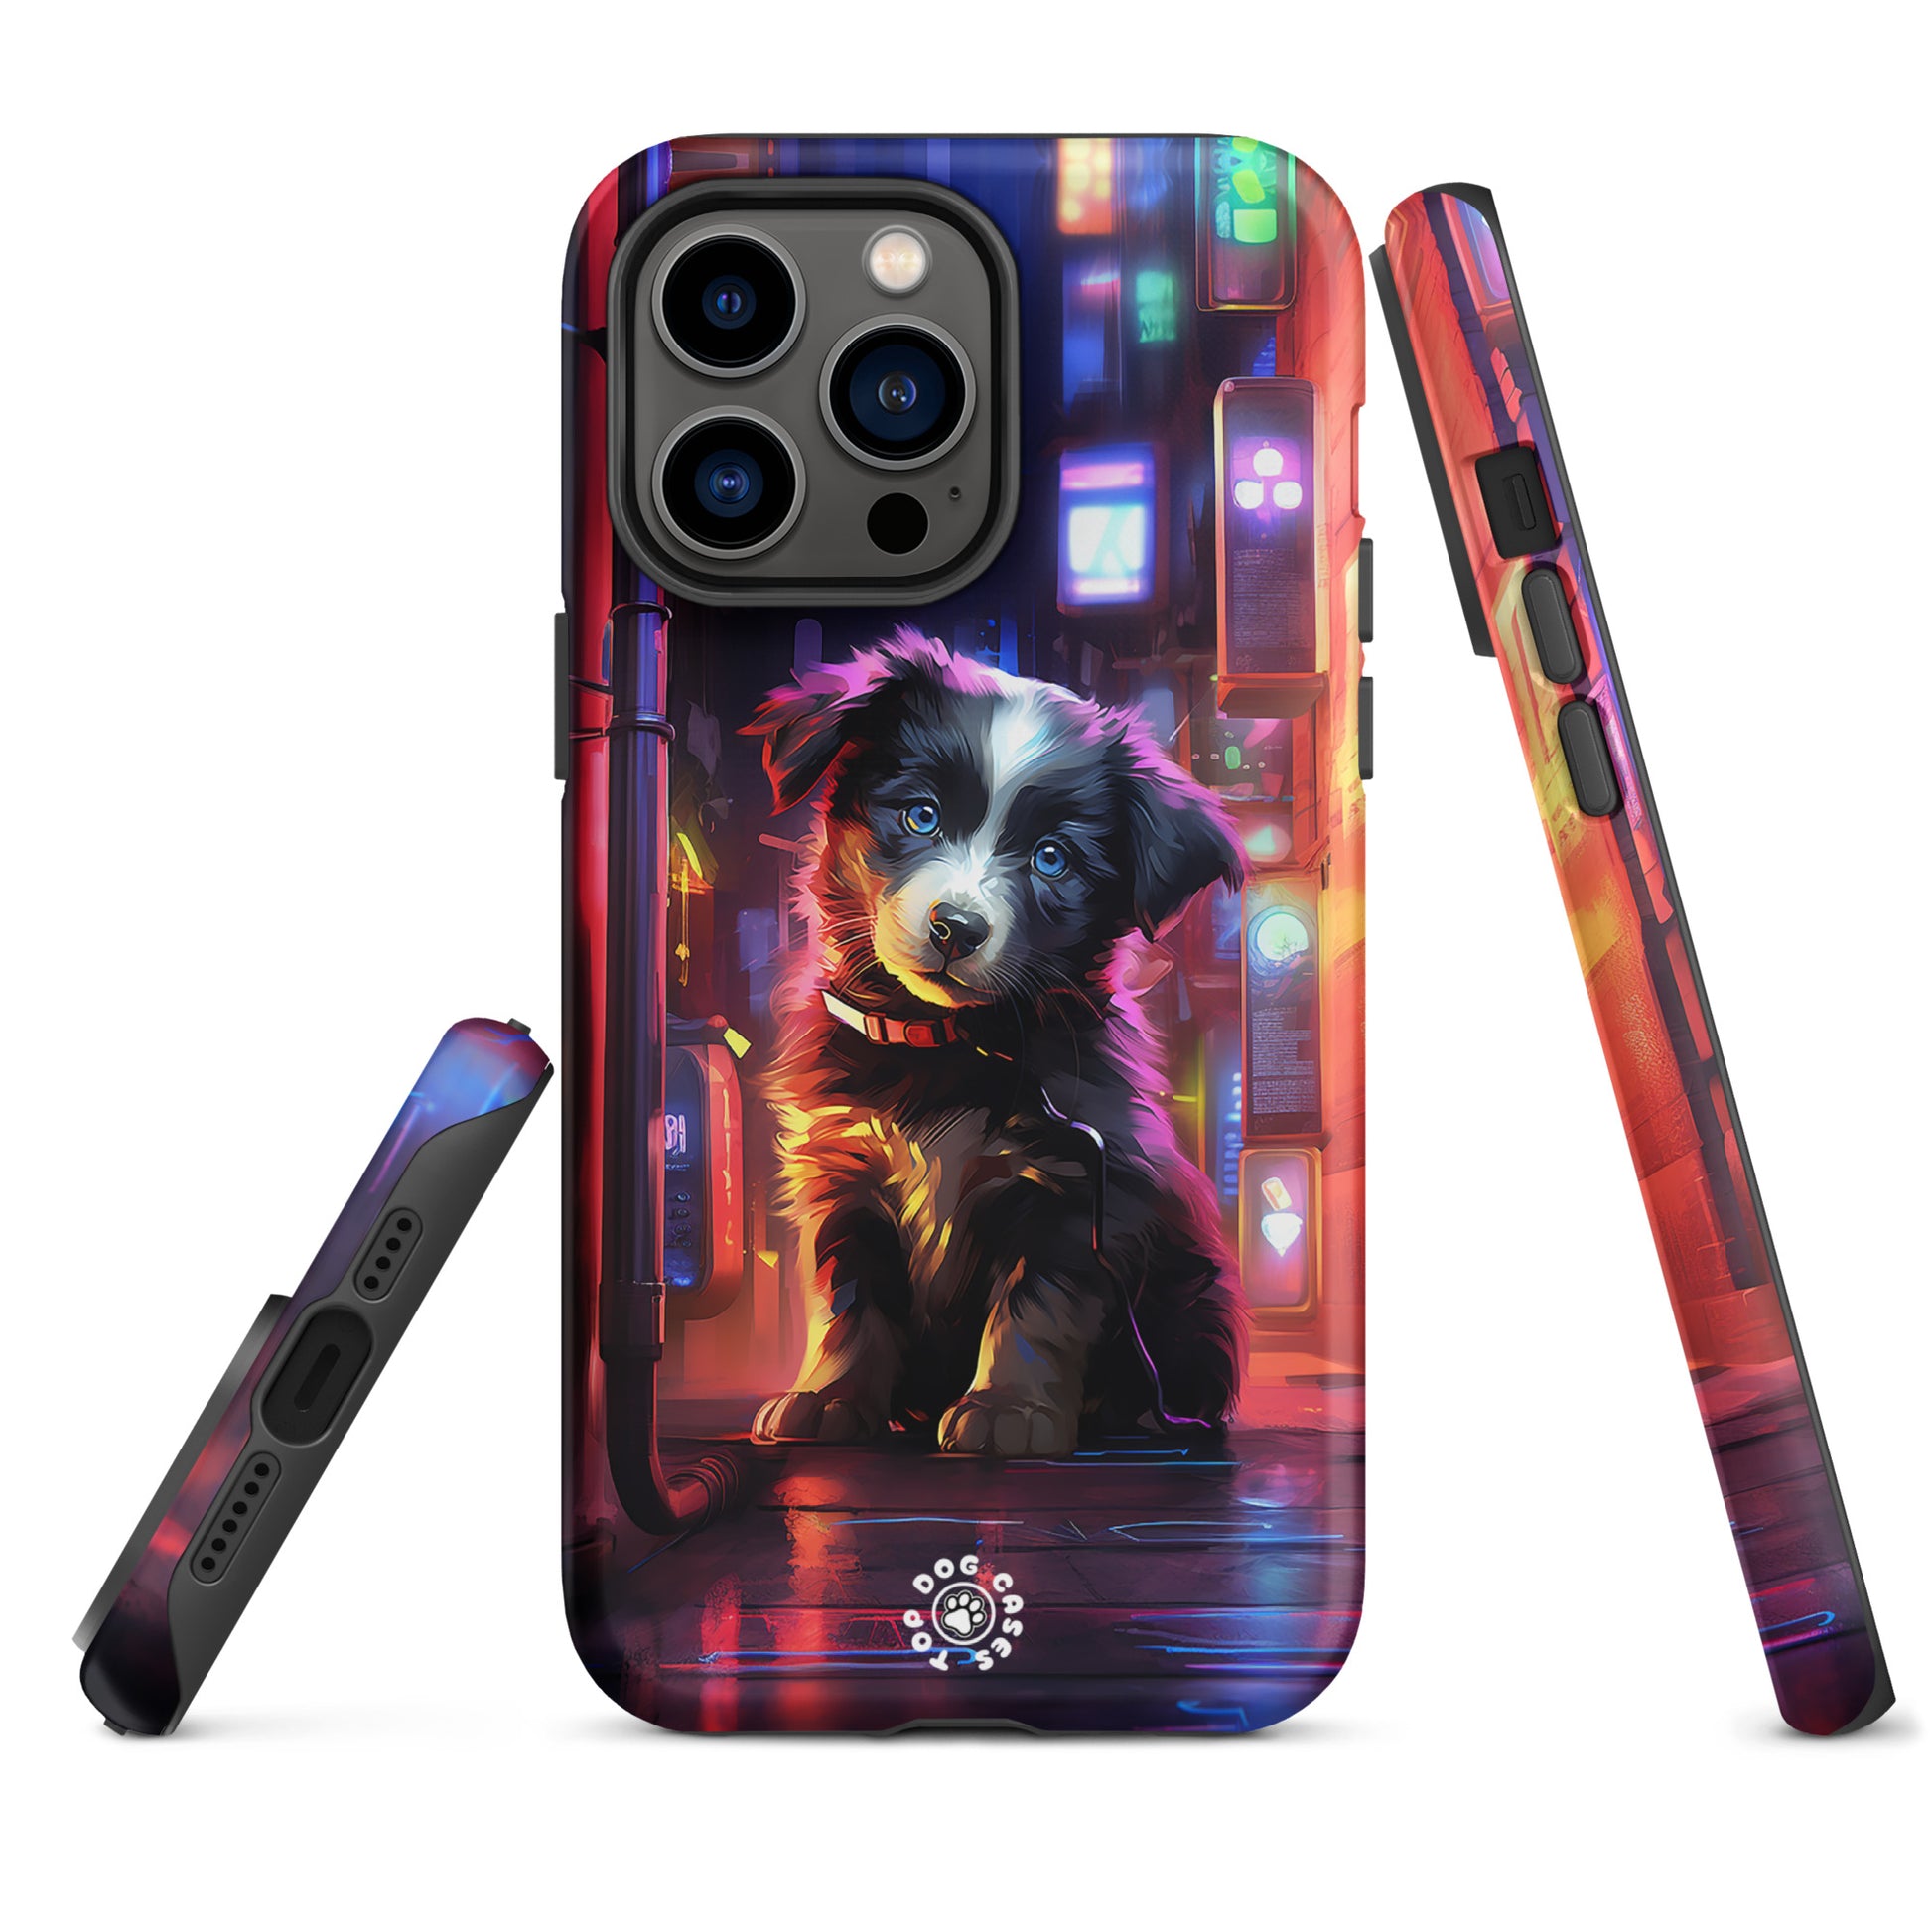 Border Collie in the City - iPhone Case - Cute Phone Cases - Top Dog Cases - #Border Collie, #BorderCollie, #BorderCollieCase, #CityDog, #CityDogs, #iPhone, #iPhone11, #iphone11case, #iPhone12, #iPhone12case, #iPhone13, #iPhone13case, #iPhone13DogCase, #iPhone13Mini, #iPhone13Pro, #iPhone13ProMax, #iPhone14, #iPhone14case, #iPhone14DogCase, #iPhone14Plus, #iPhone14Pluscase, #iPhone14Pro, #iPhone14ProMax, #iPhone14ProMaxCase, #iPhone15, #iPhone15case, #iPhonecase, #iphonedogcase